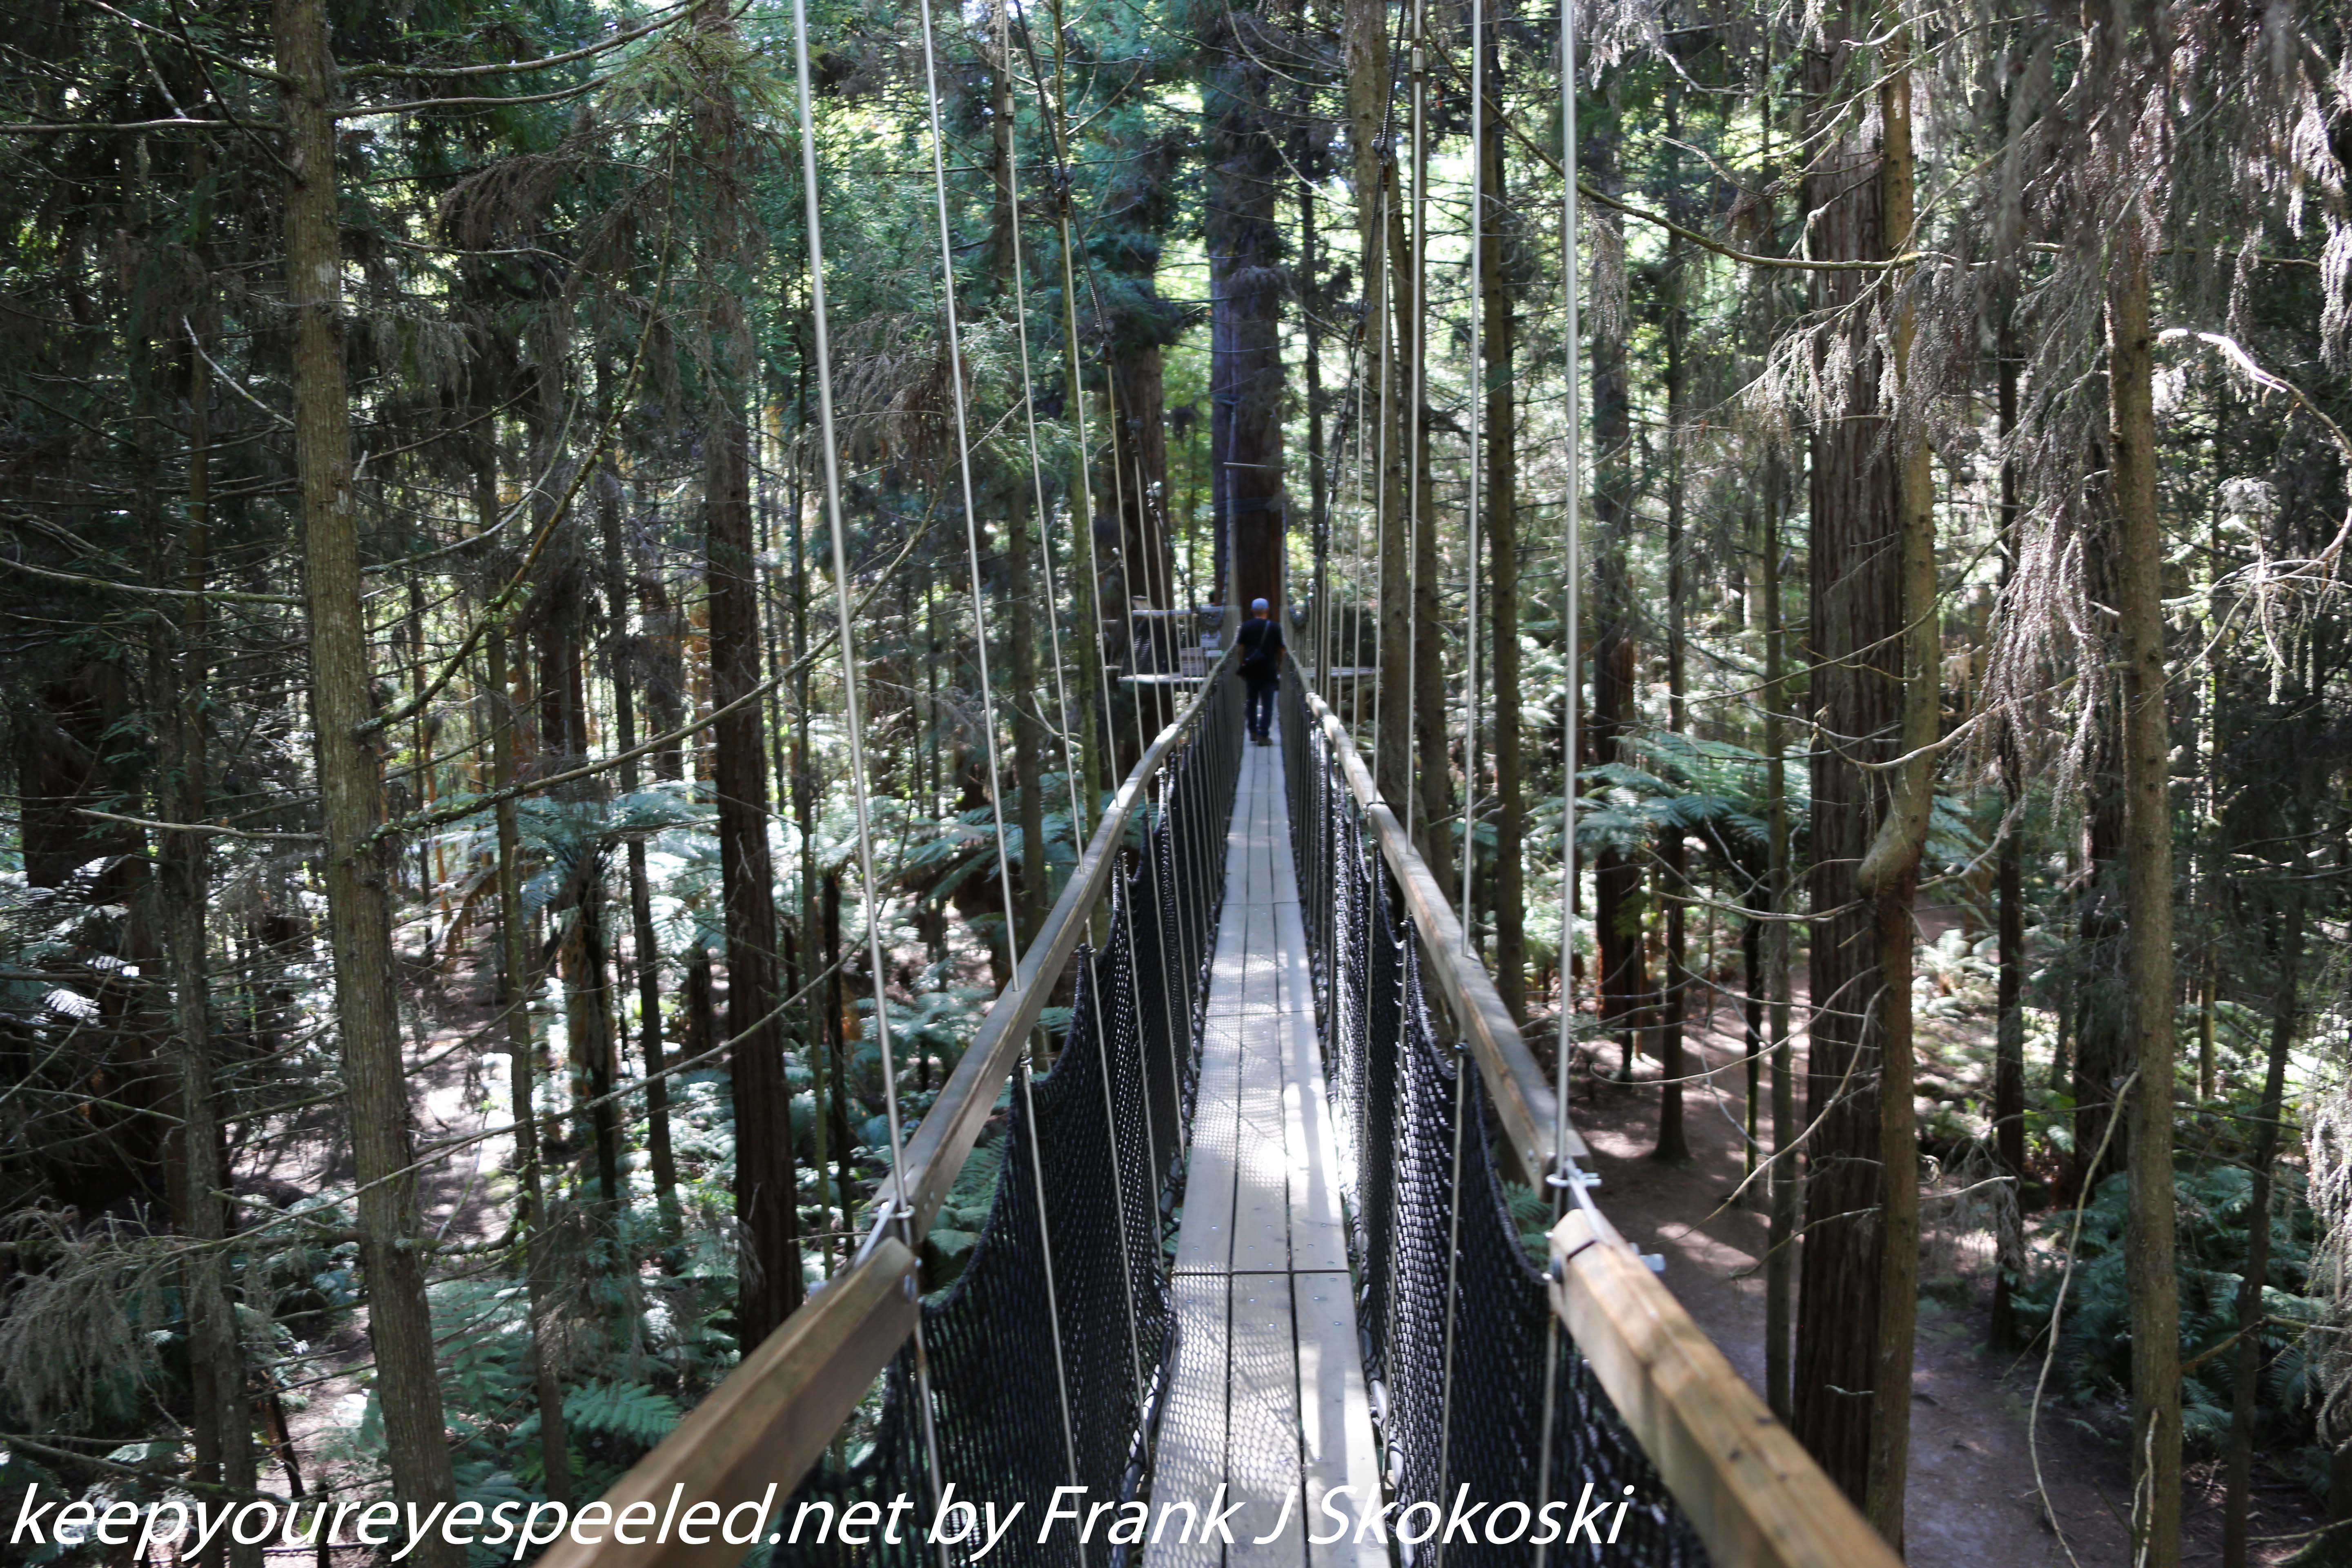 New-zealand-Day-Fifteen-Rotorua-Rewood-forest-and-Blue-lake-34-of-49